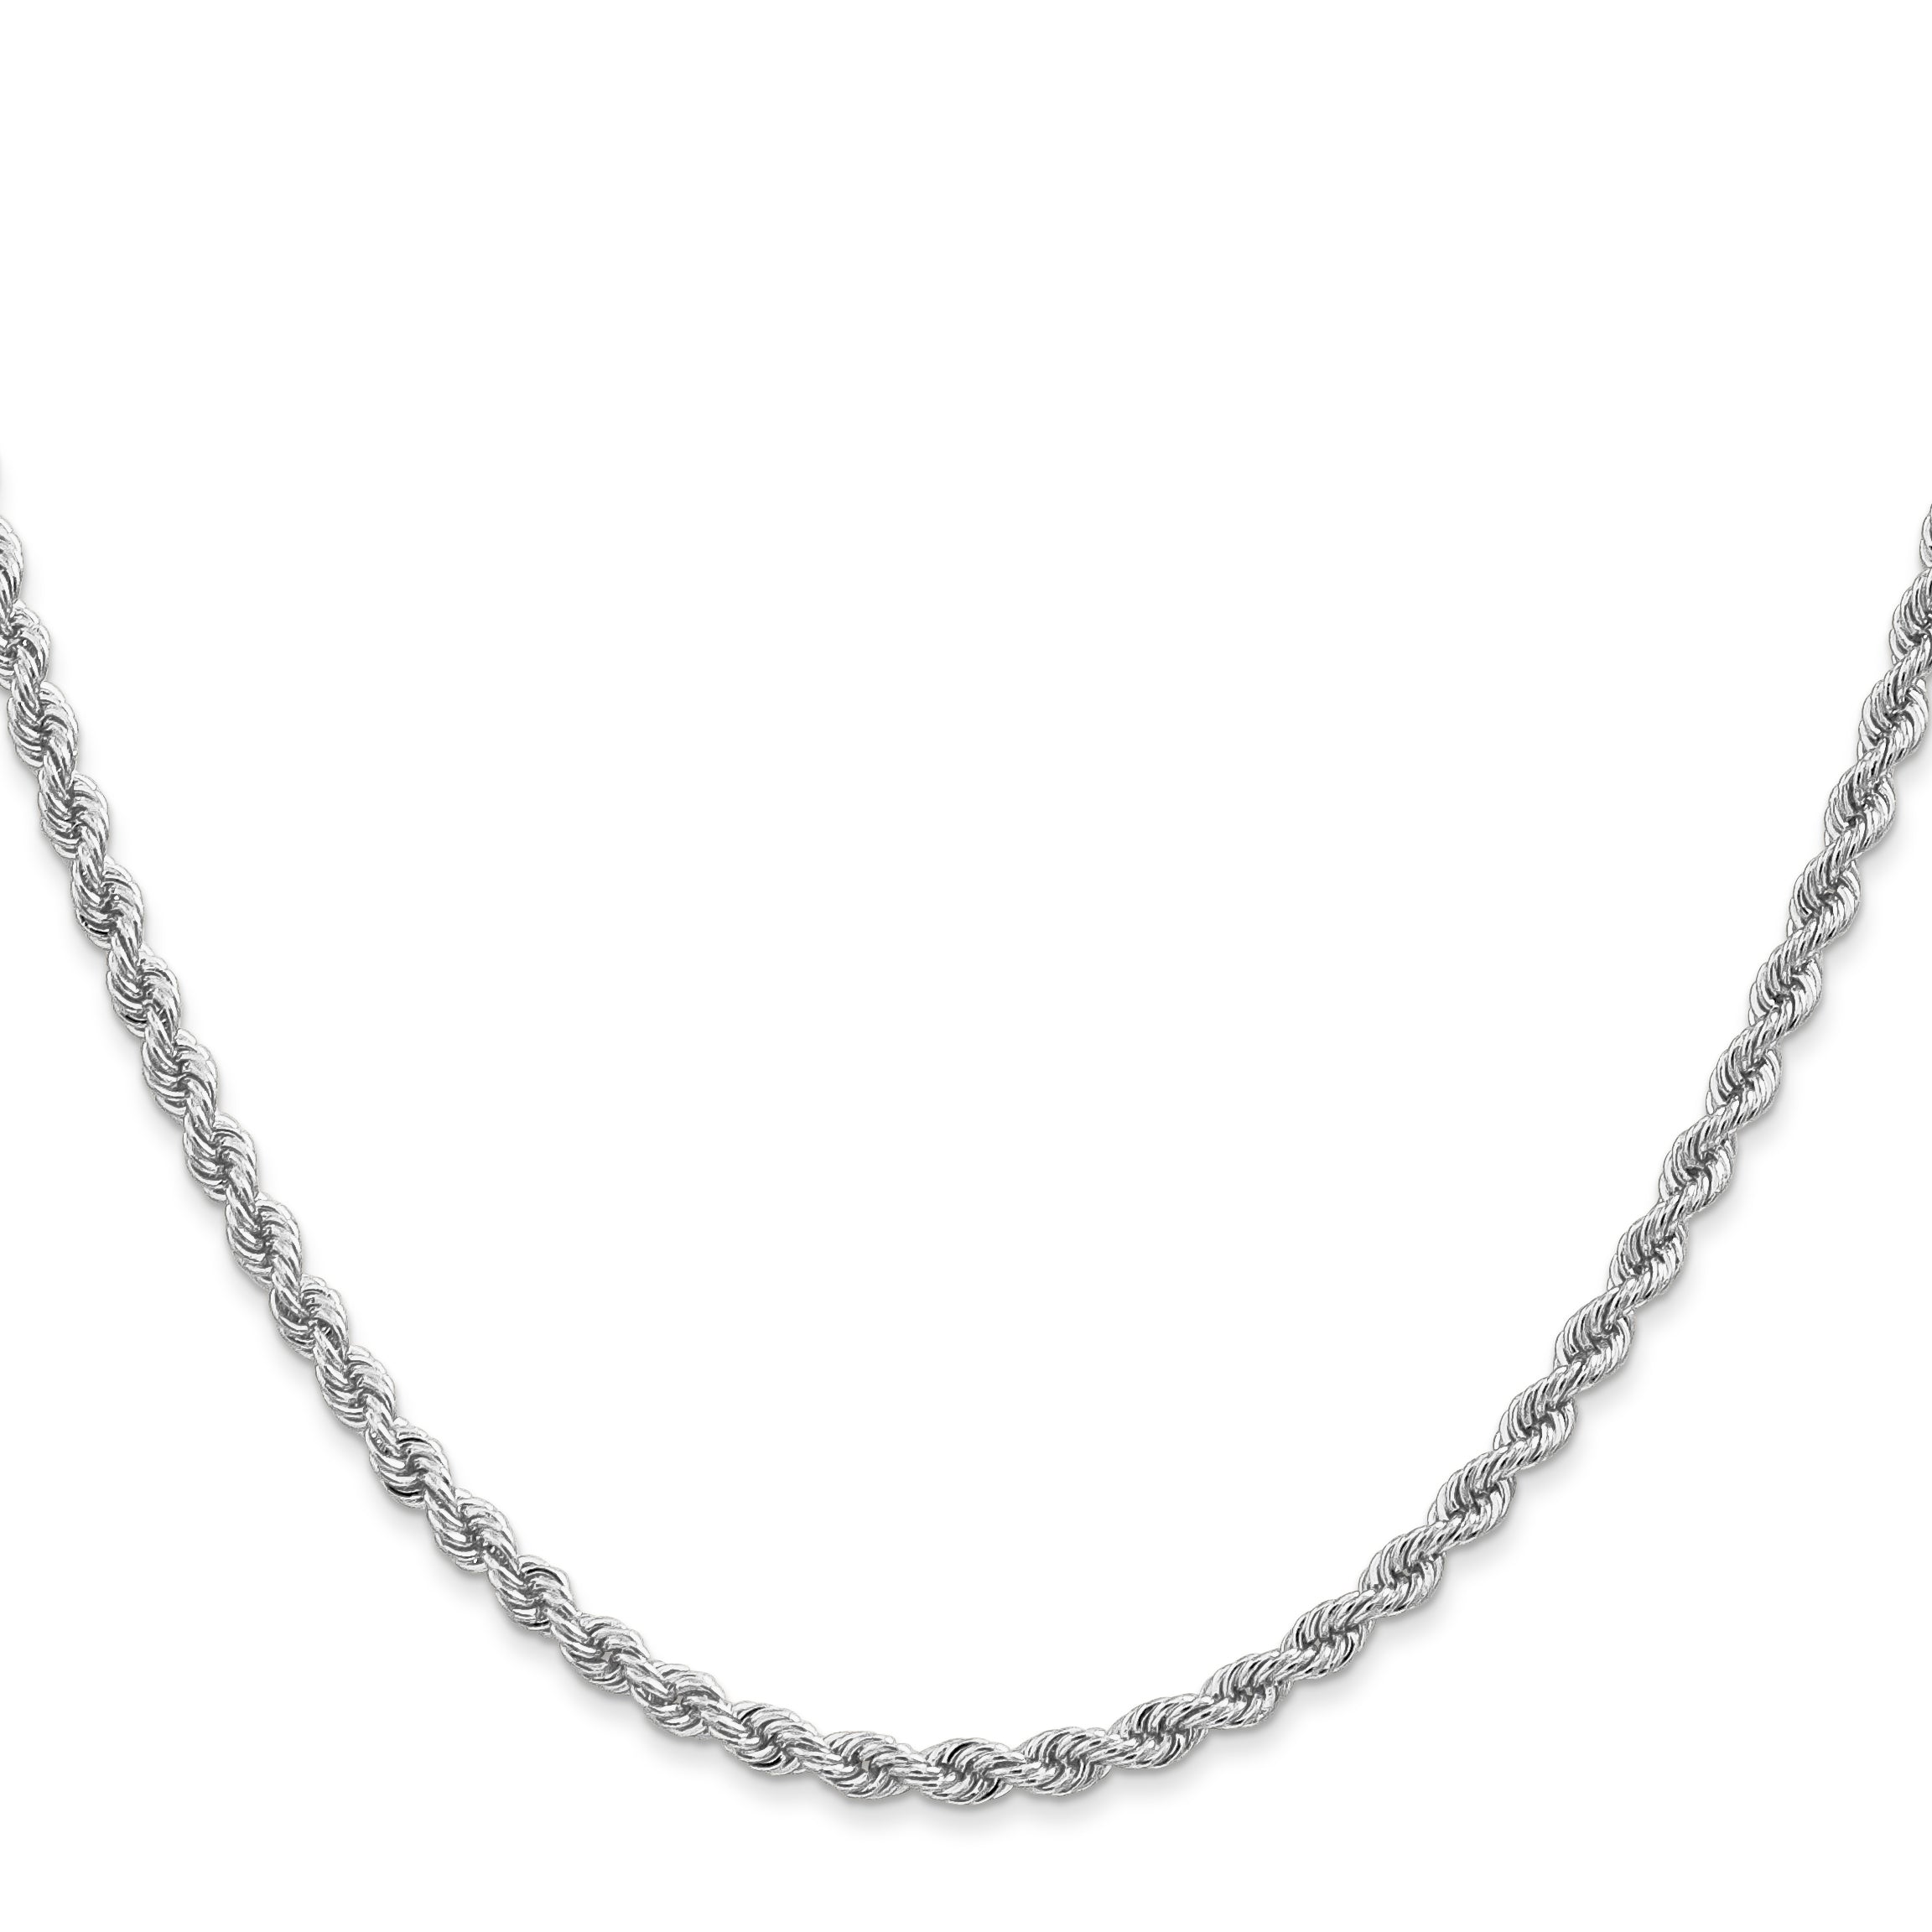 14K White Gold 16 inch 2.75mm Regular Rope with Lobster Clasp Chain